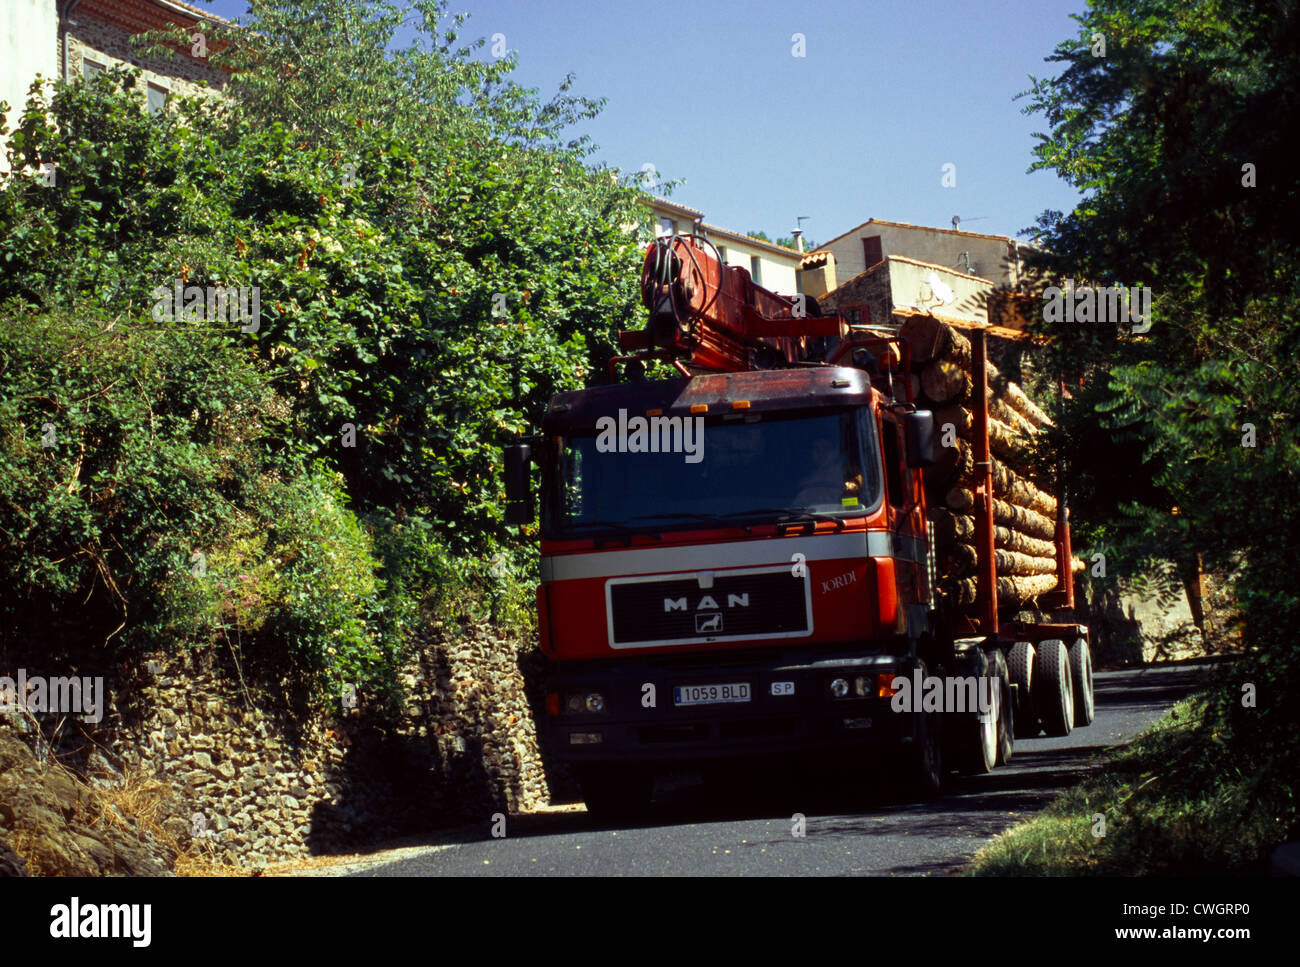 St Marsal France Languedoc-Roussillon Lorry Carying Tree Logs On Narrow Road Stock Photo